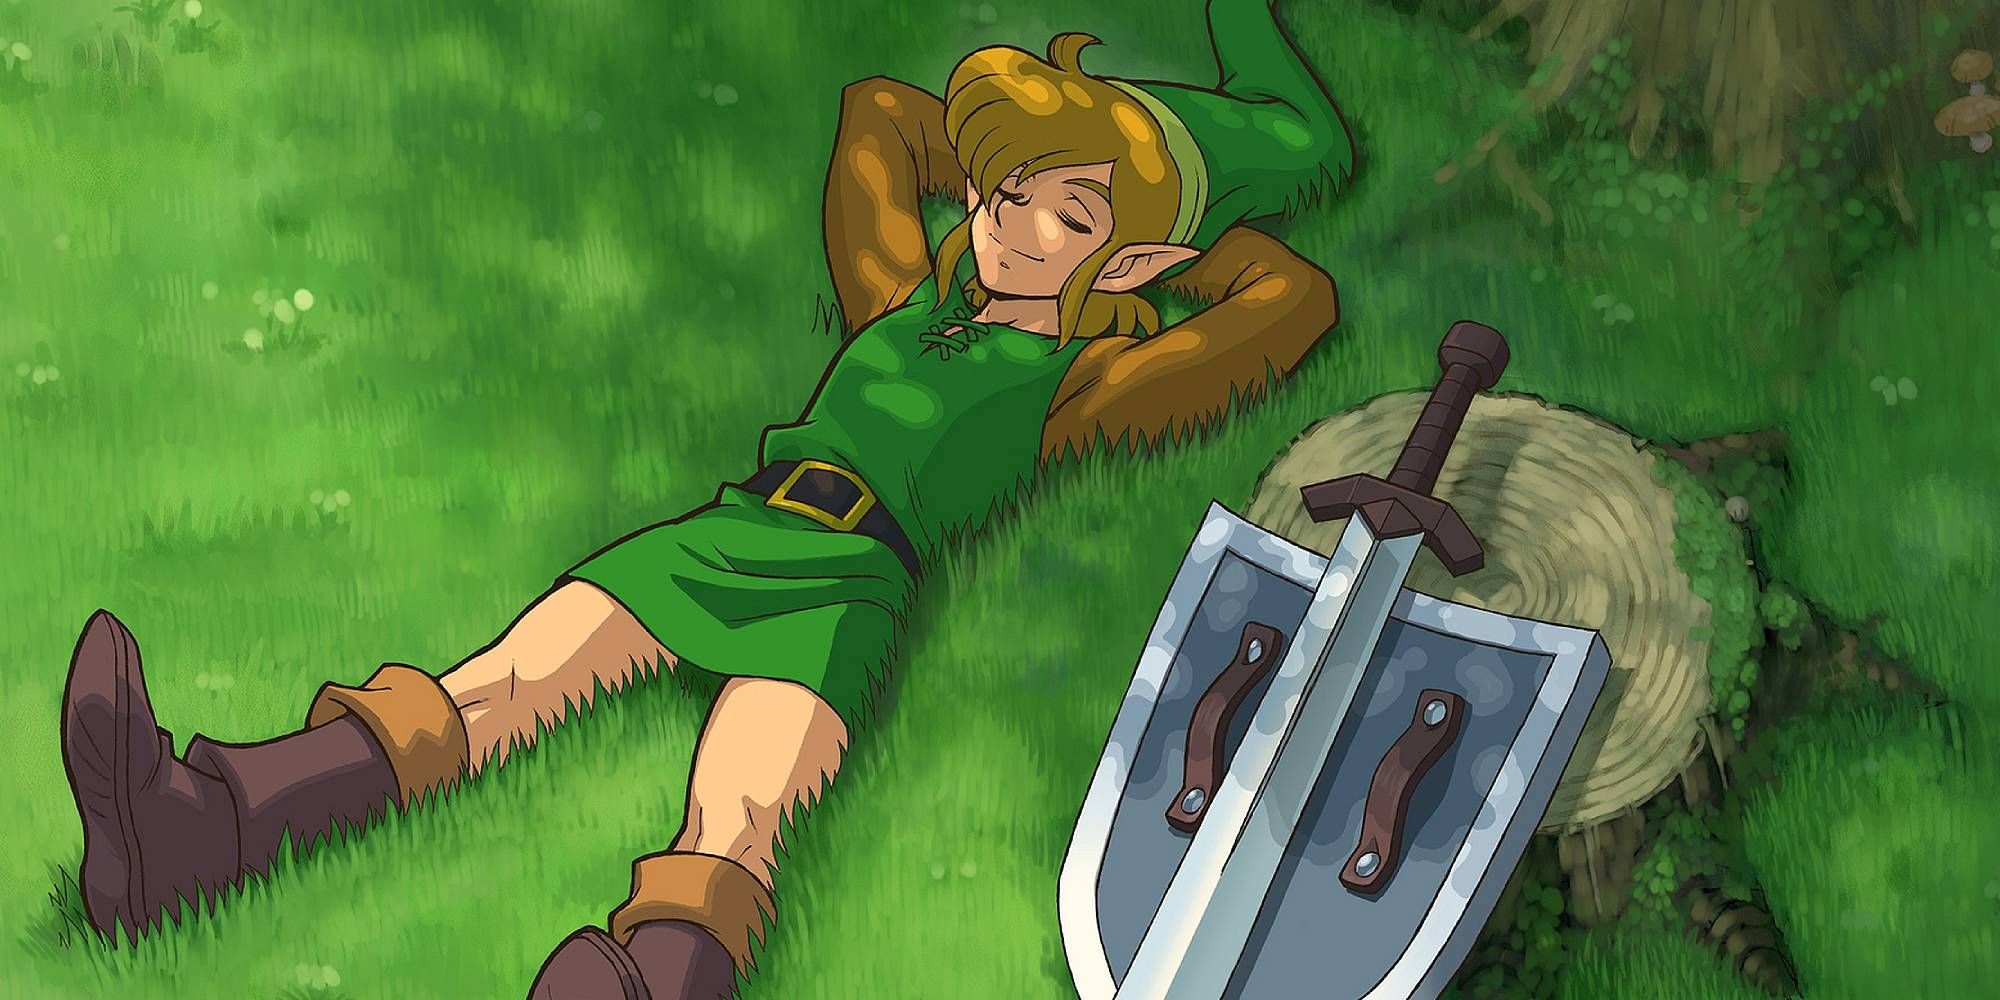 Artwork of a man in a green tunic laying on a field with a sword and shield resting nearby